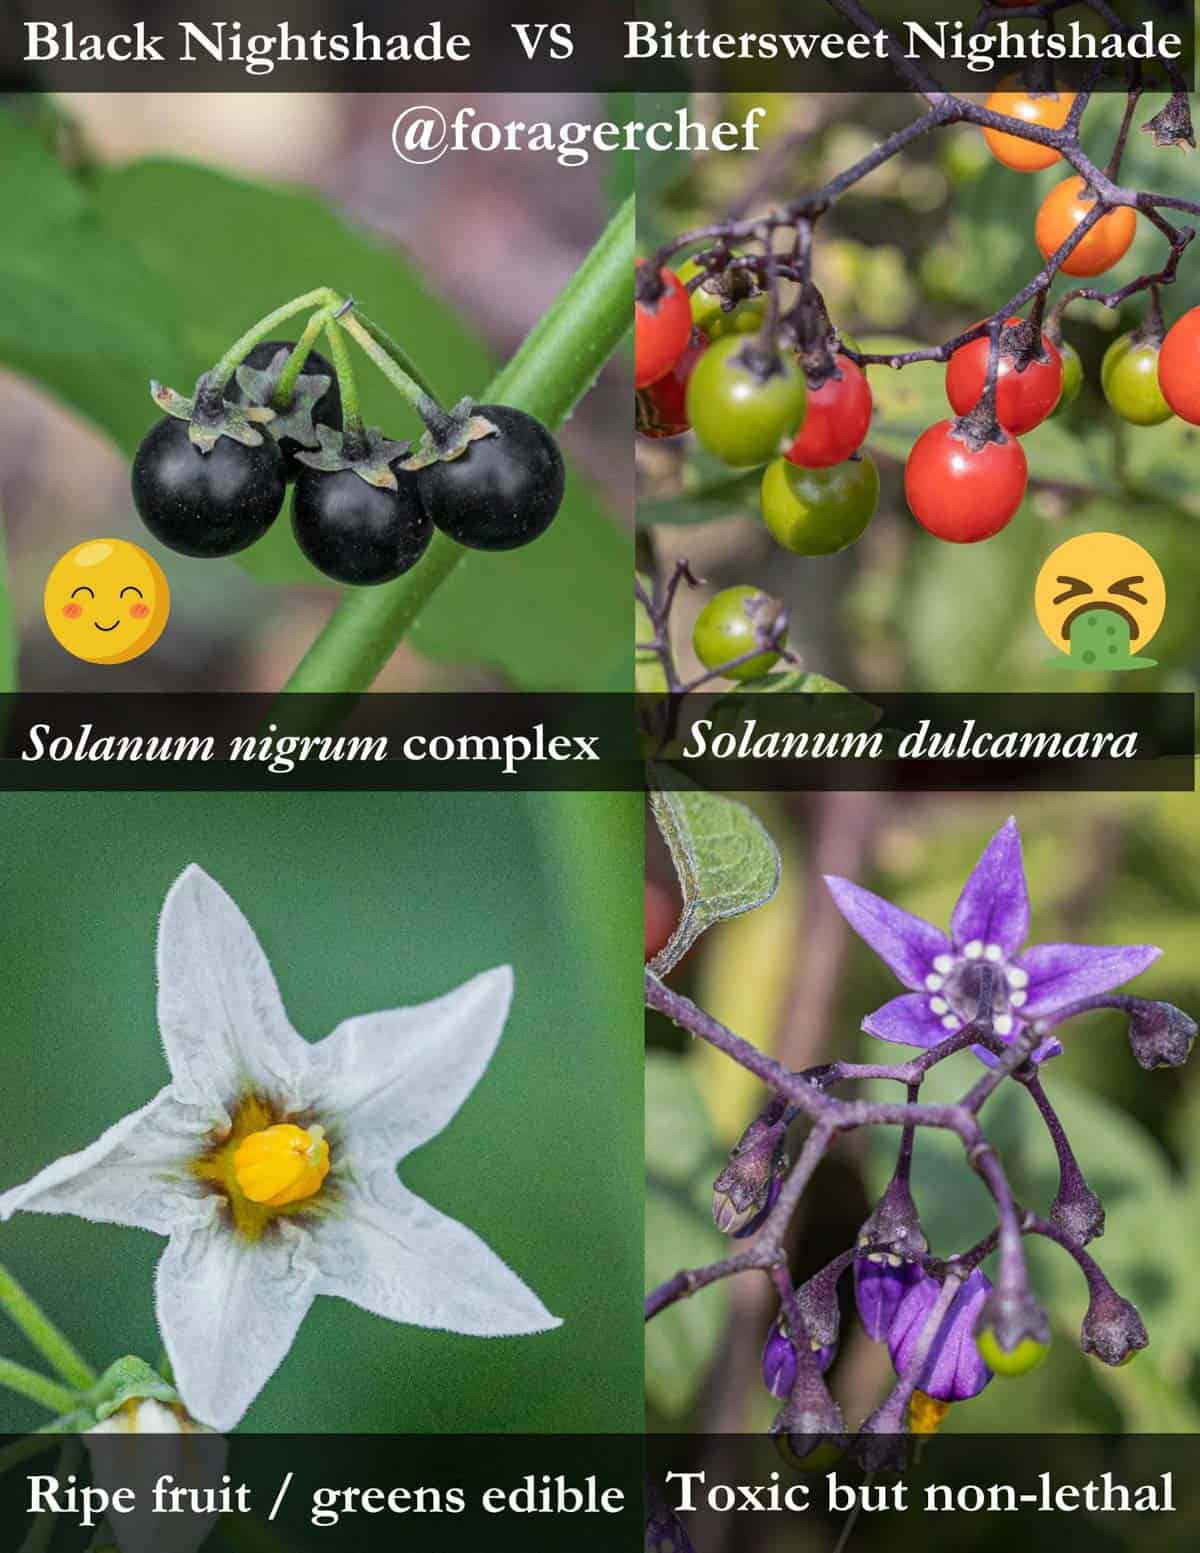 An infographic containing 6 images comparing the identification differences between edible black nightshade fruit, berries and leaves with toxic bittersweet nightshade for identification purposes. 